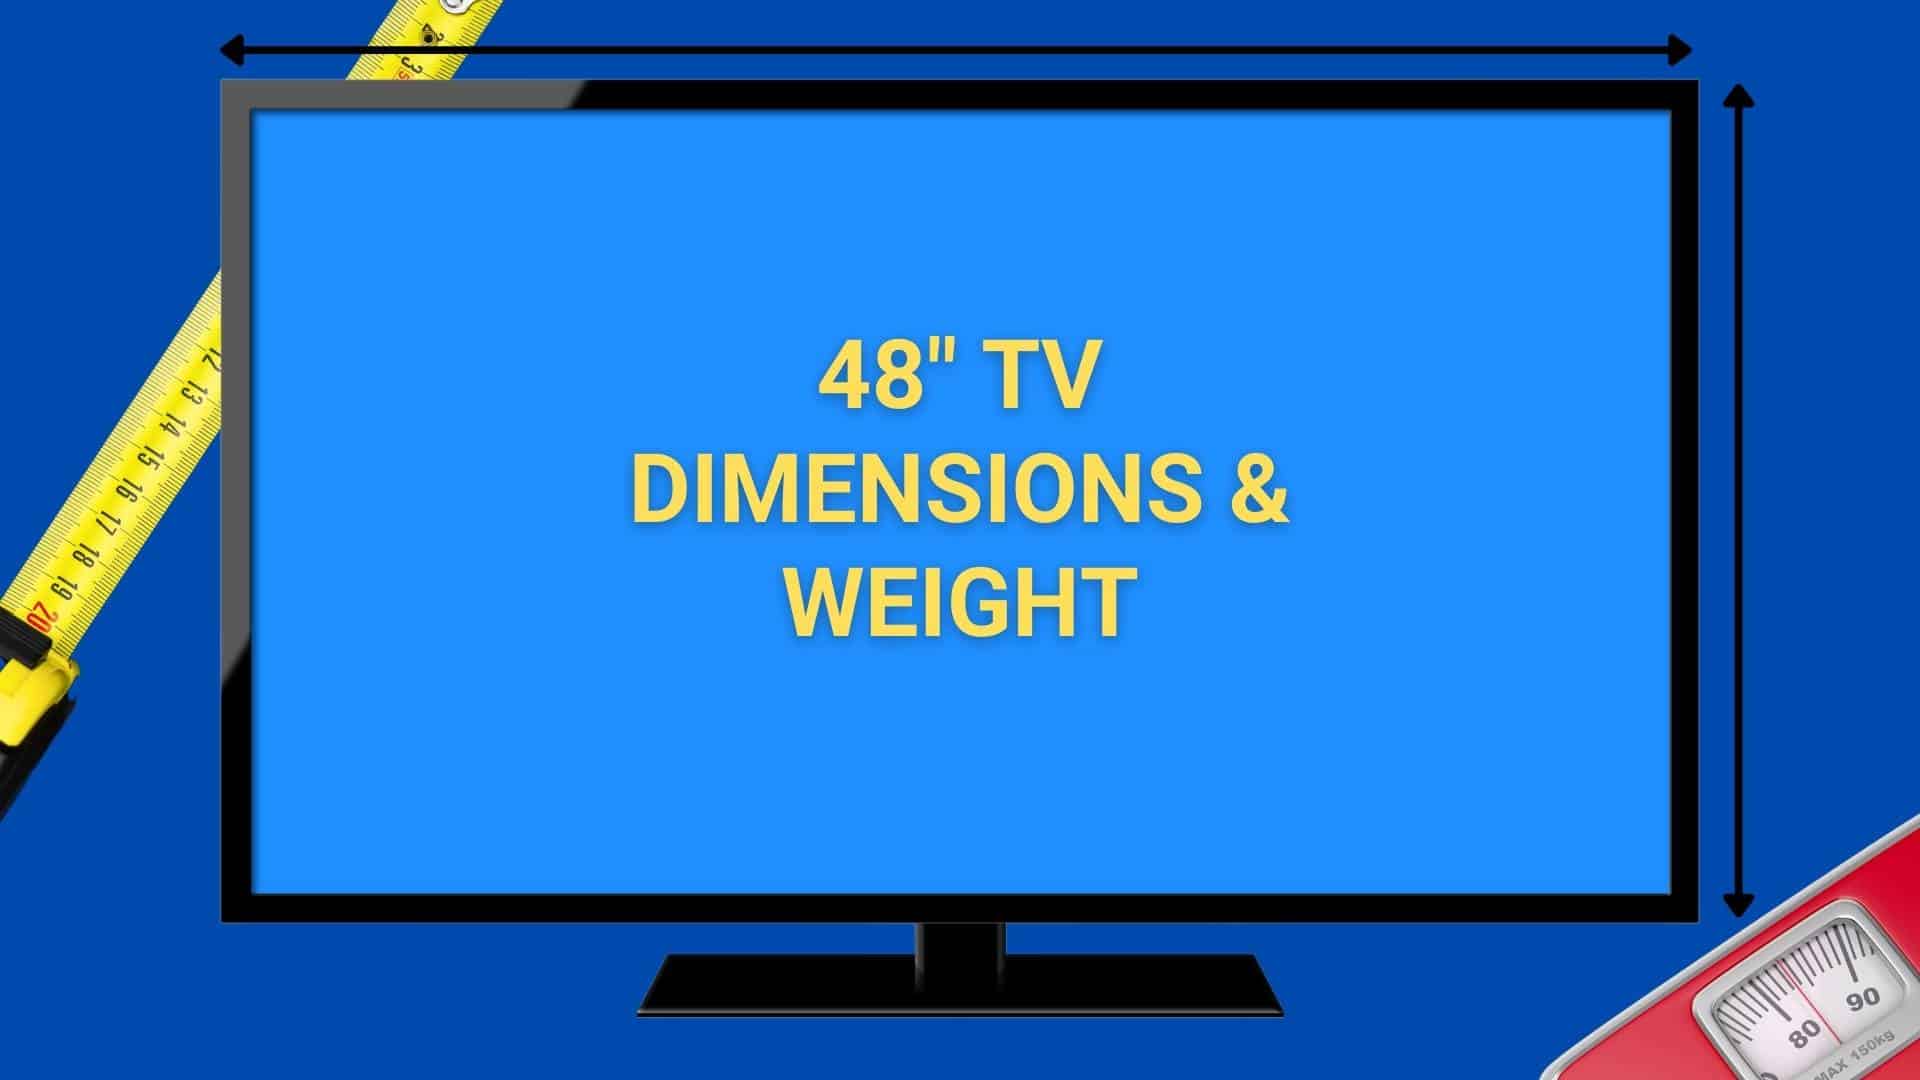 Image of 48 inch TV with measuring tape and bath scale in background.